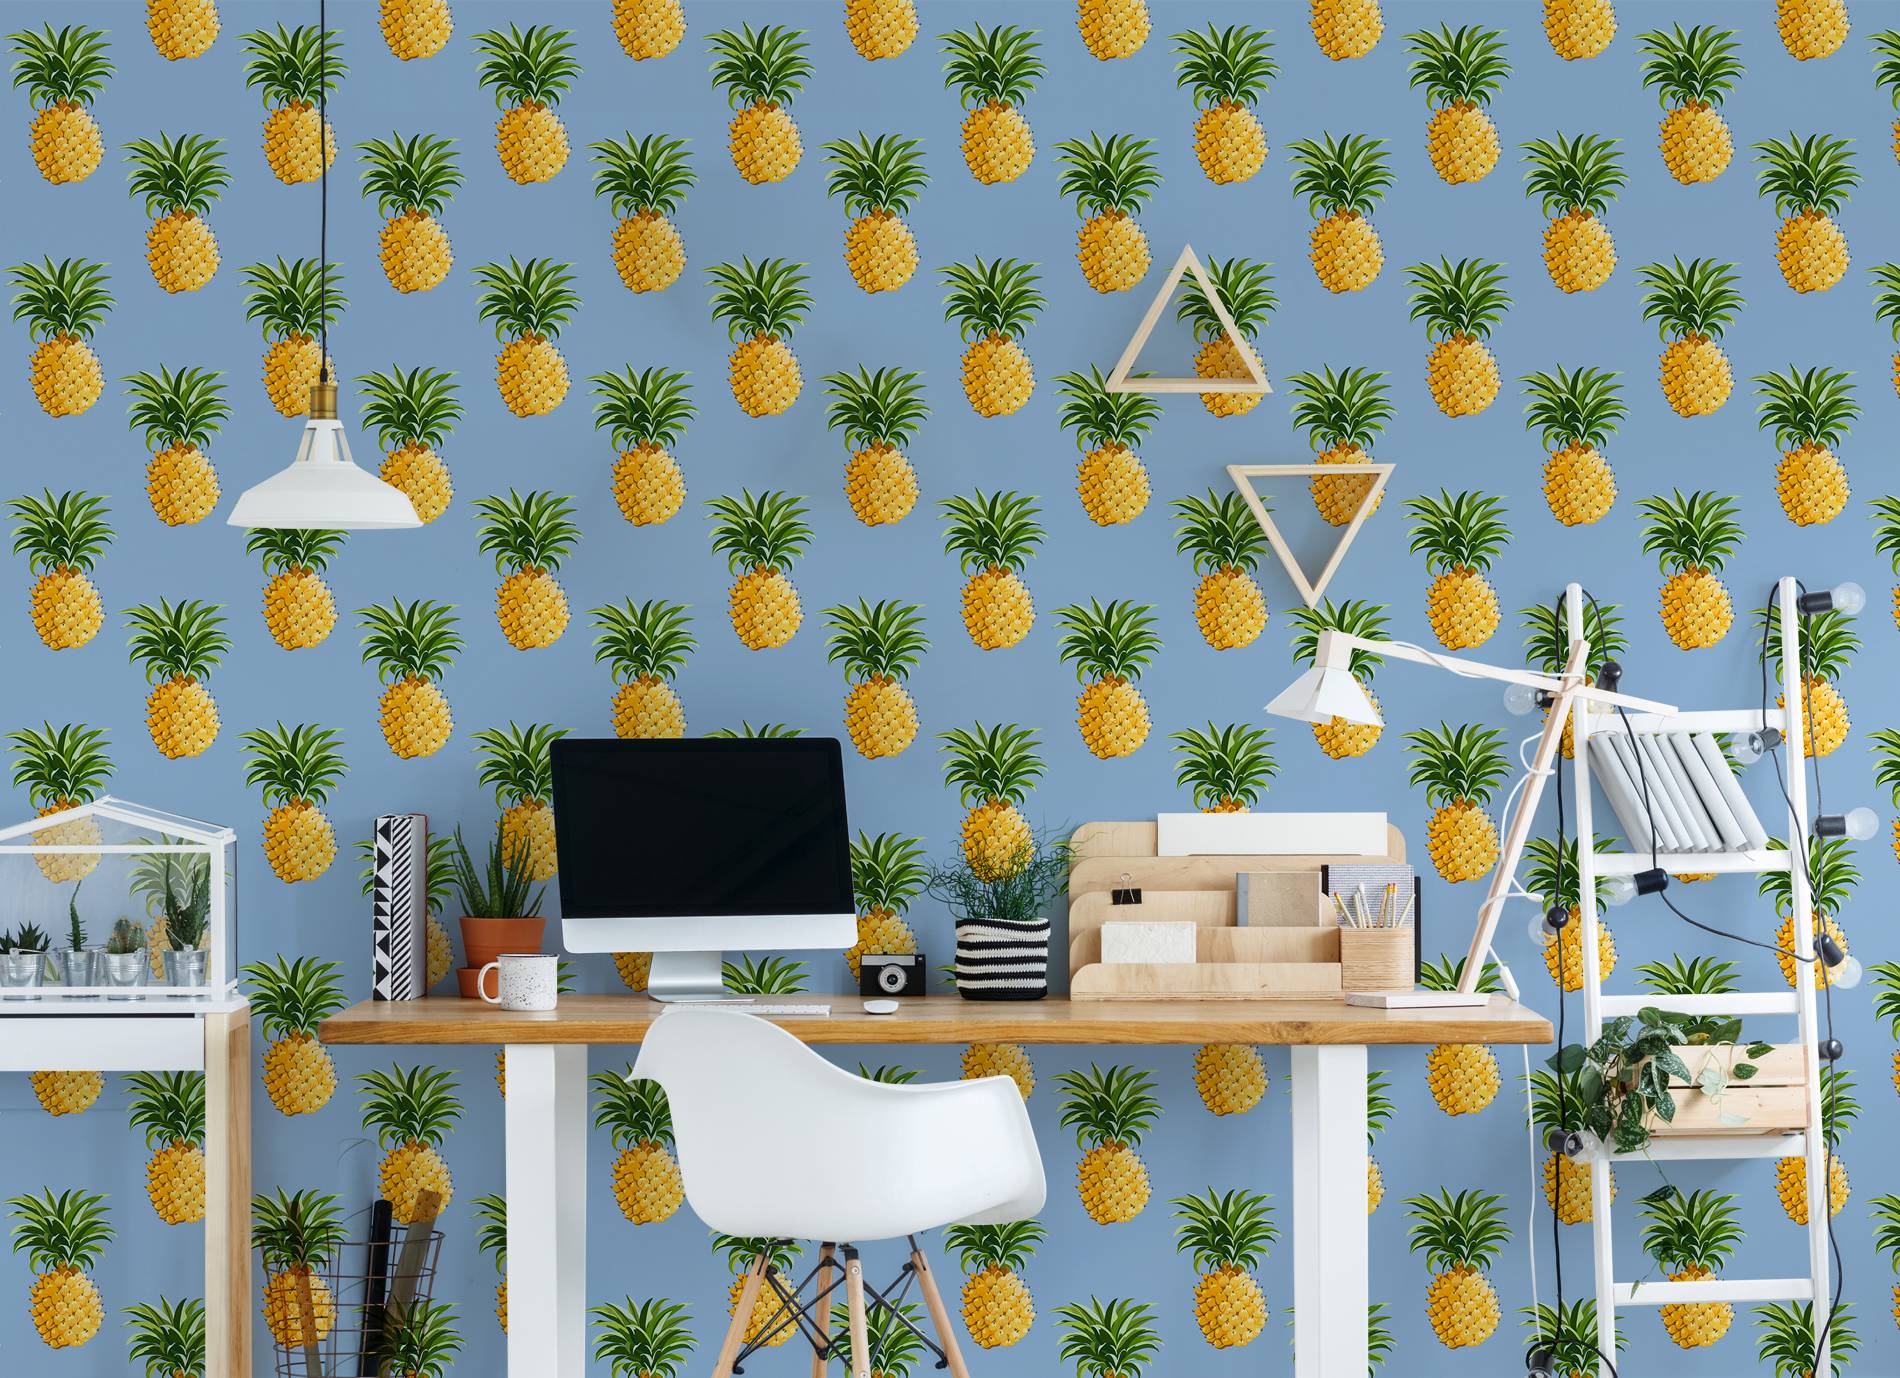 Pineapple sky • Contemporary - Office - Nature - Wall Murals